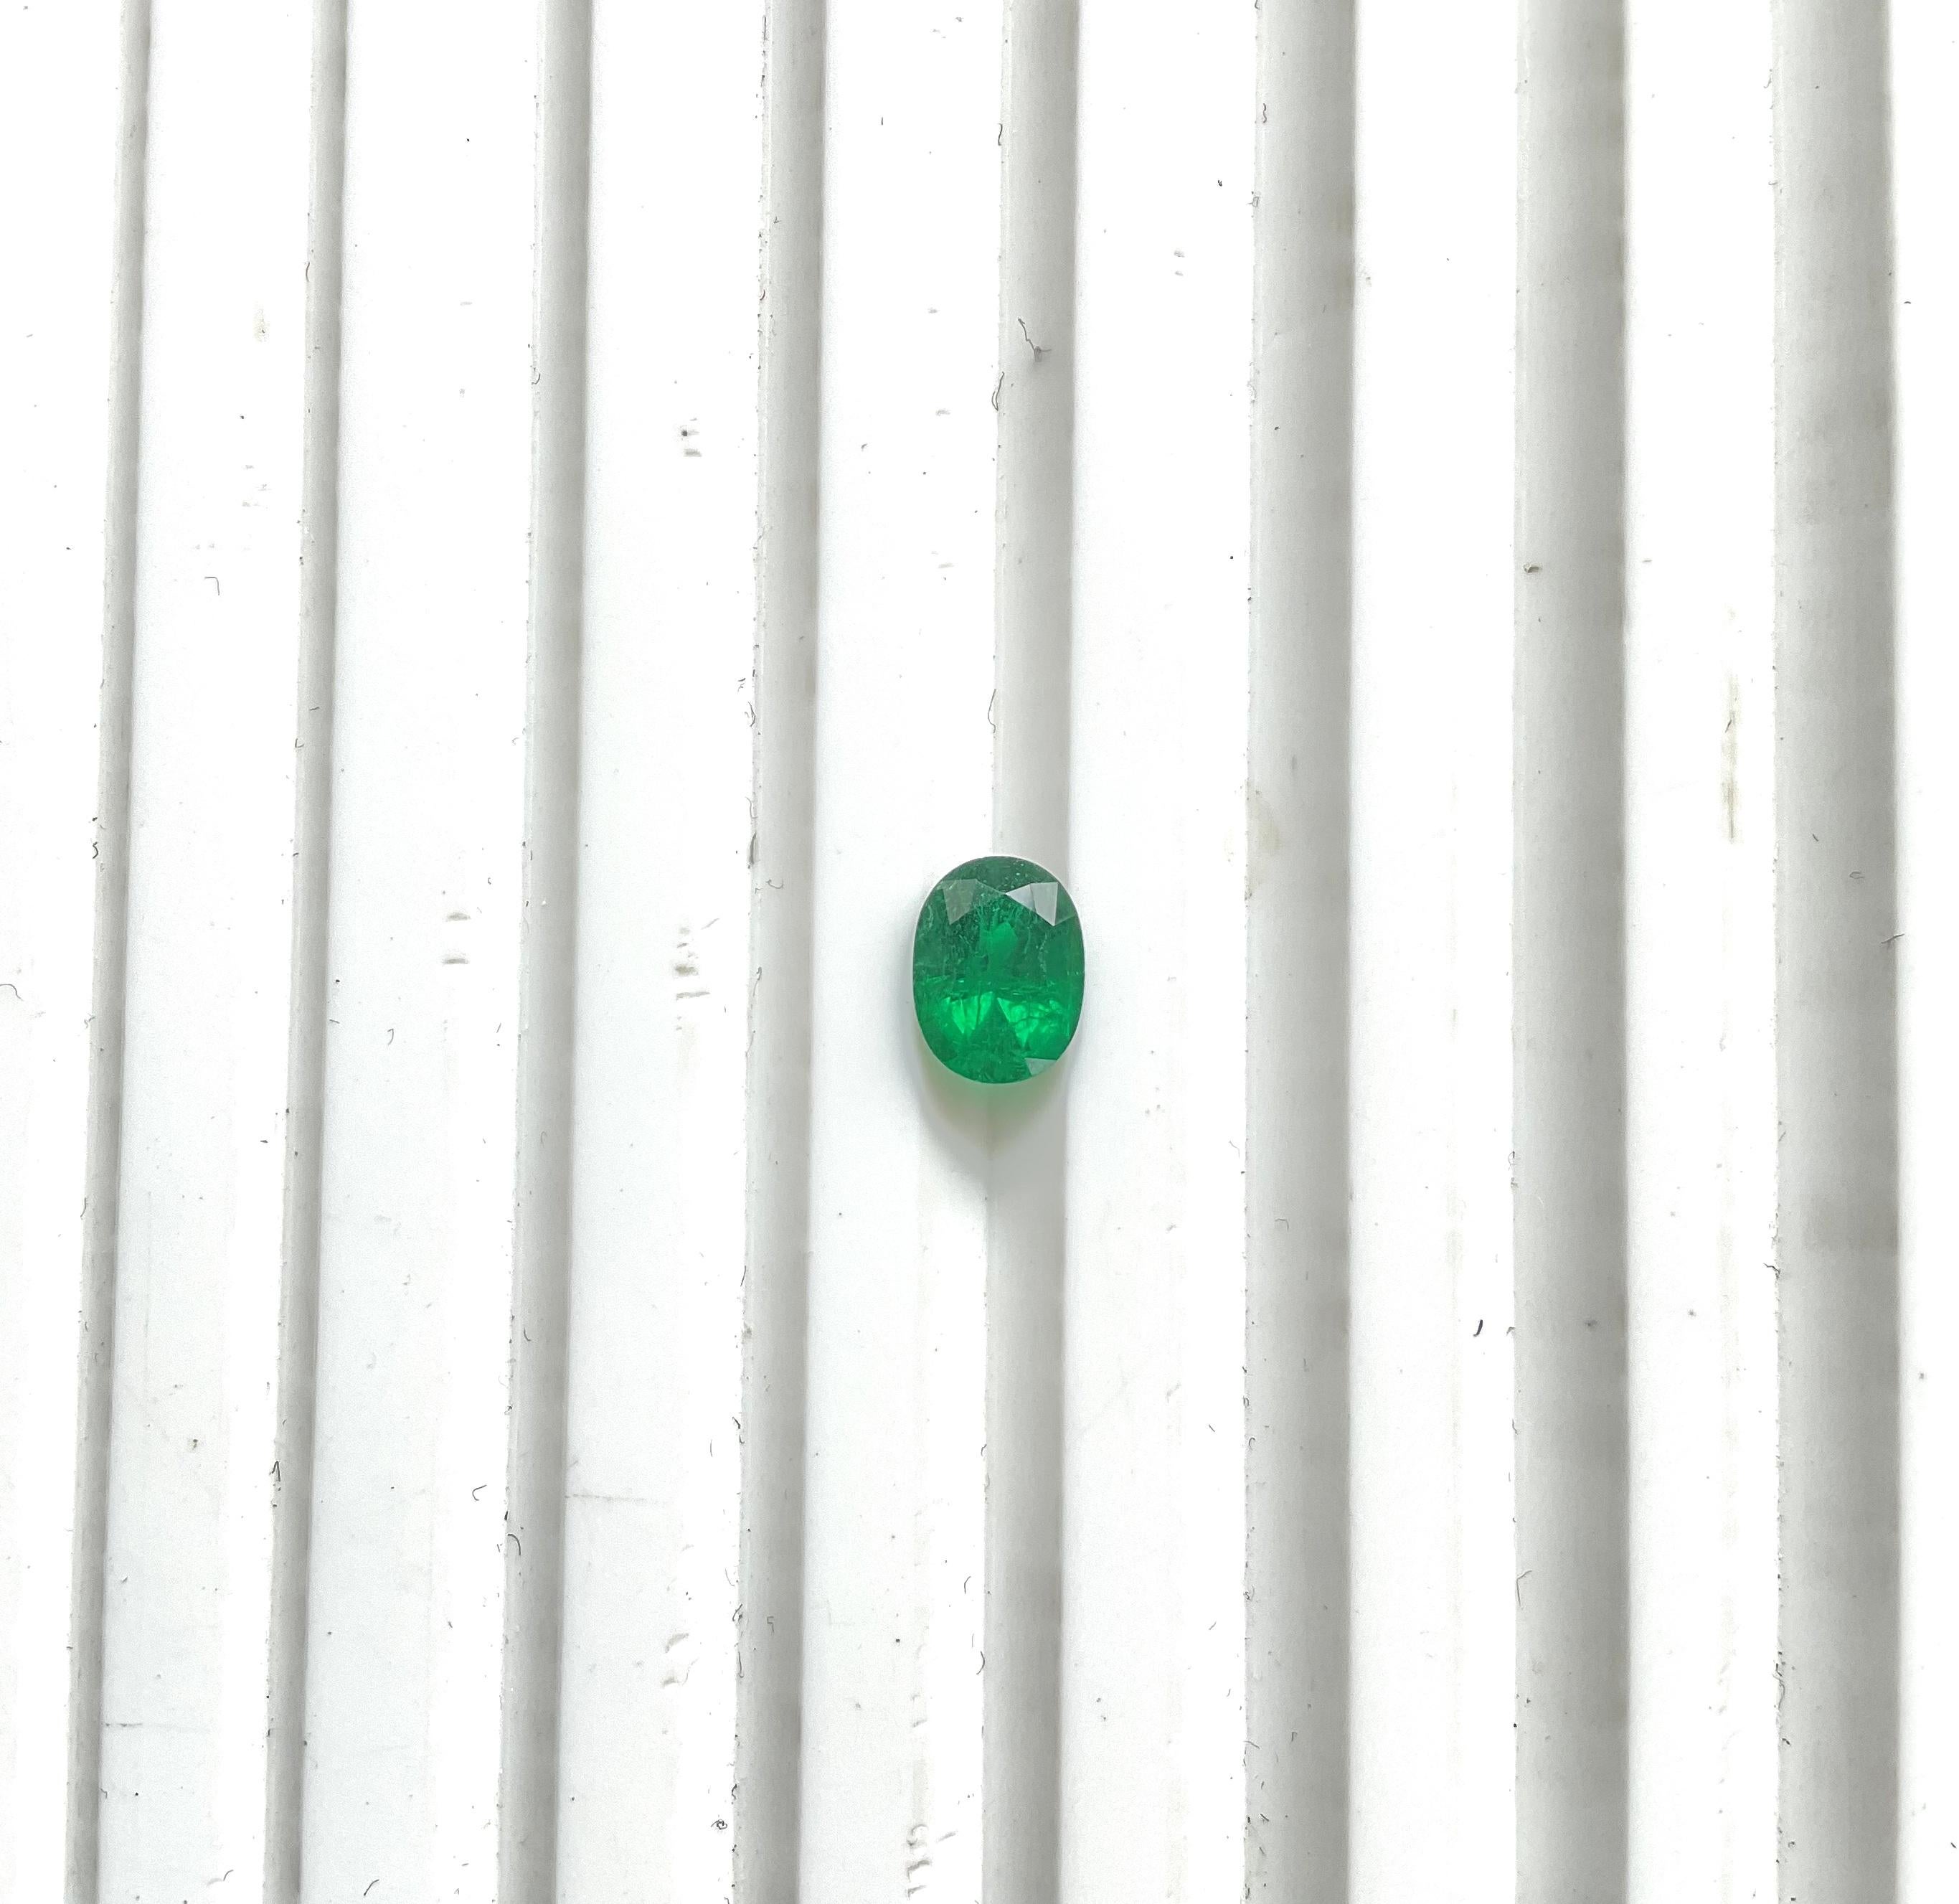 1.00 carats Zambian Emerald Oval Cut stone for fine Jewelry Natural Gemstone
Weight: 1.00 Carats
Size: 7x5 MM
Pieces: 1
Shape: Oval